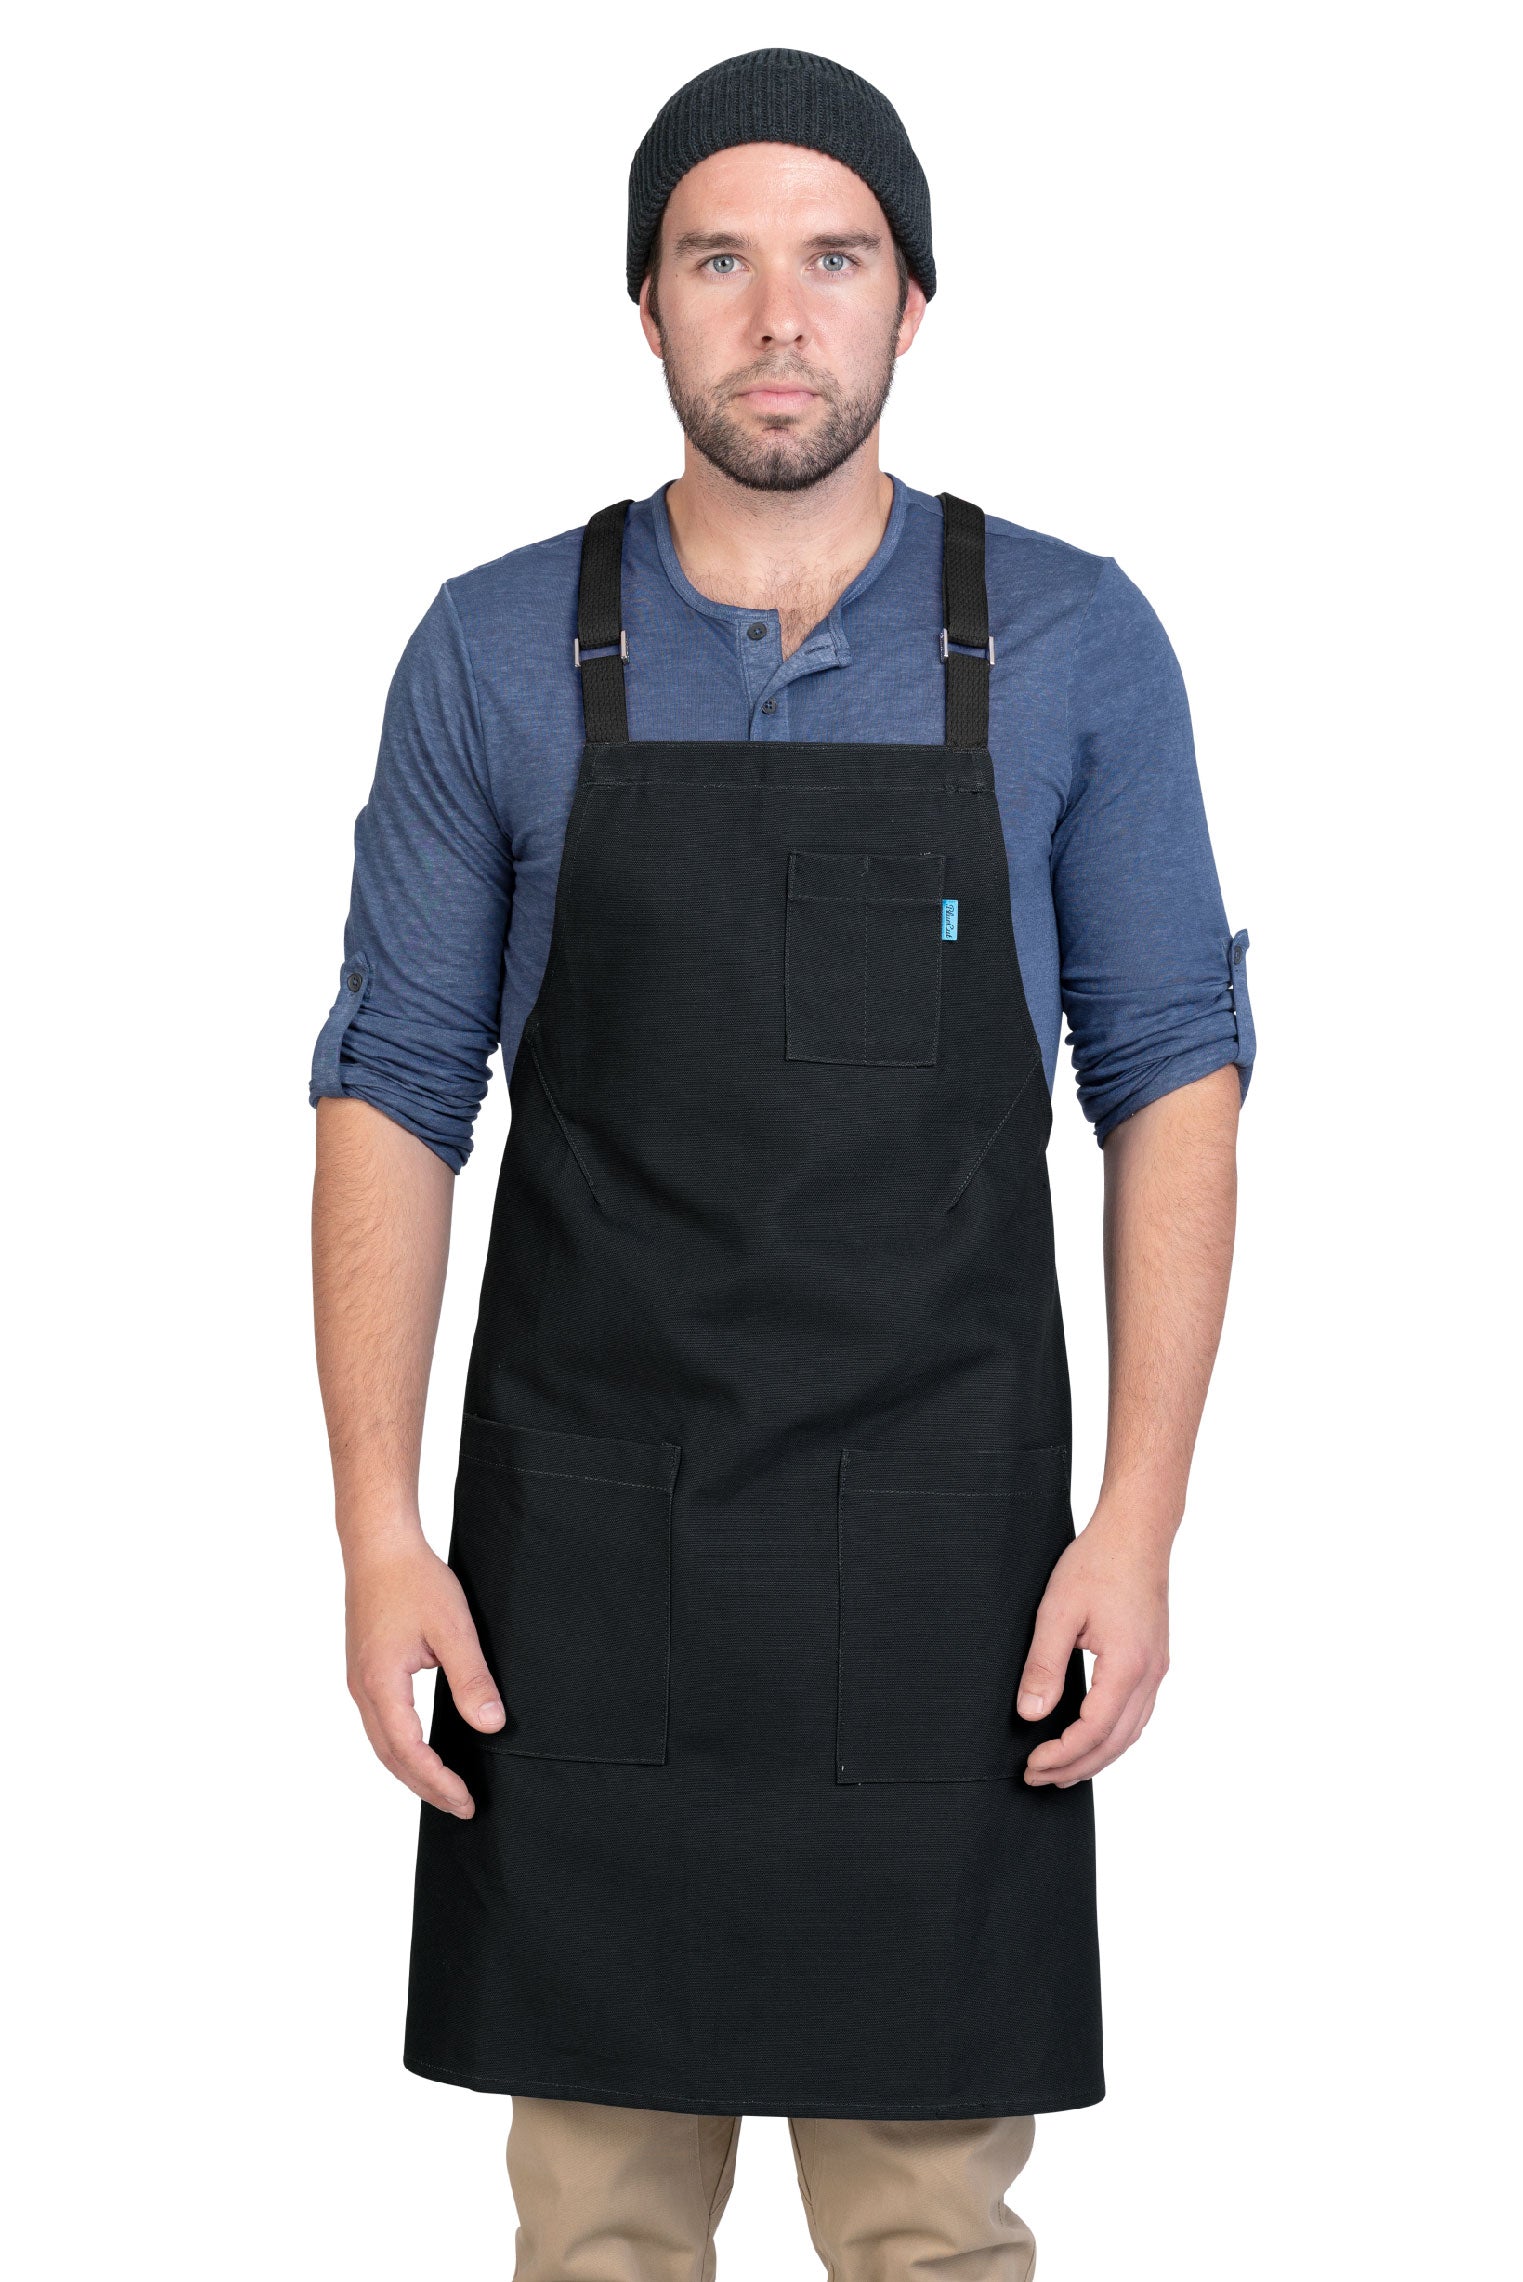 Lucca Crossback Apron Canvas | BlueCutAprons | Handmade Chef